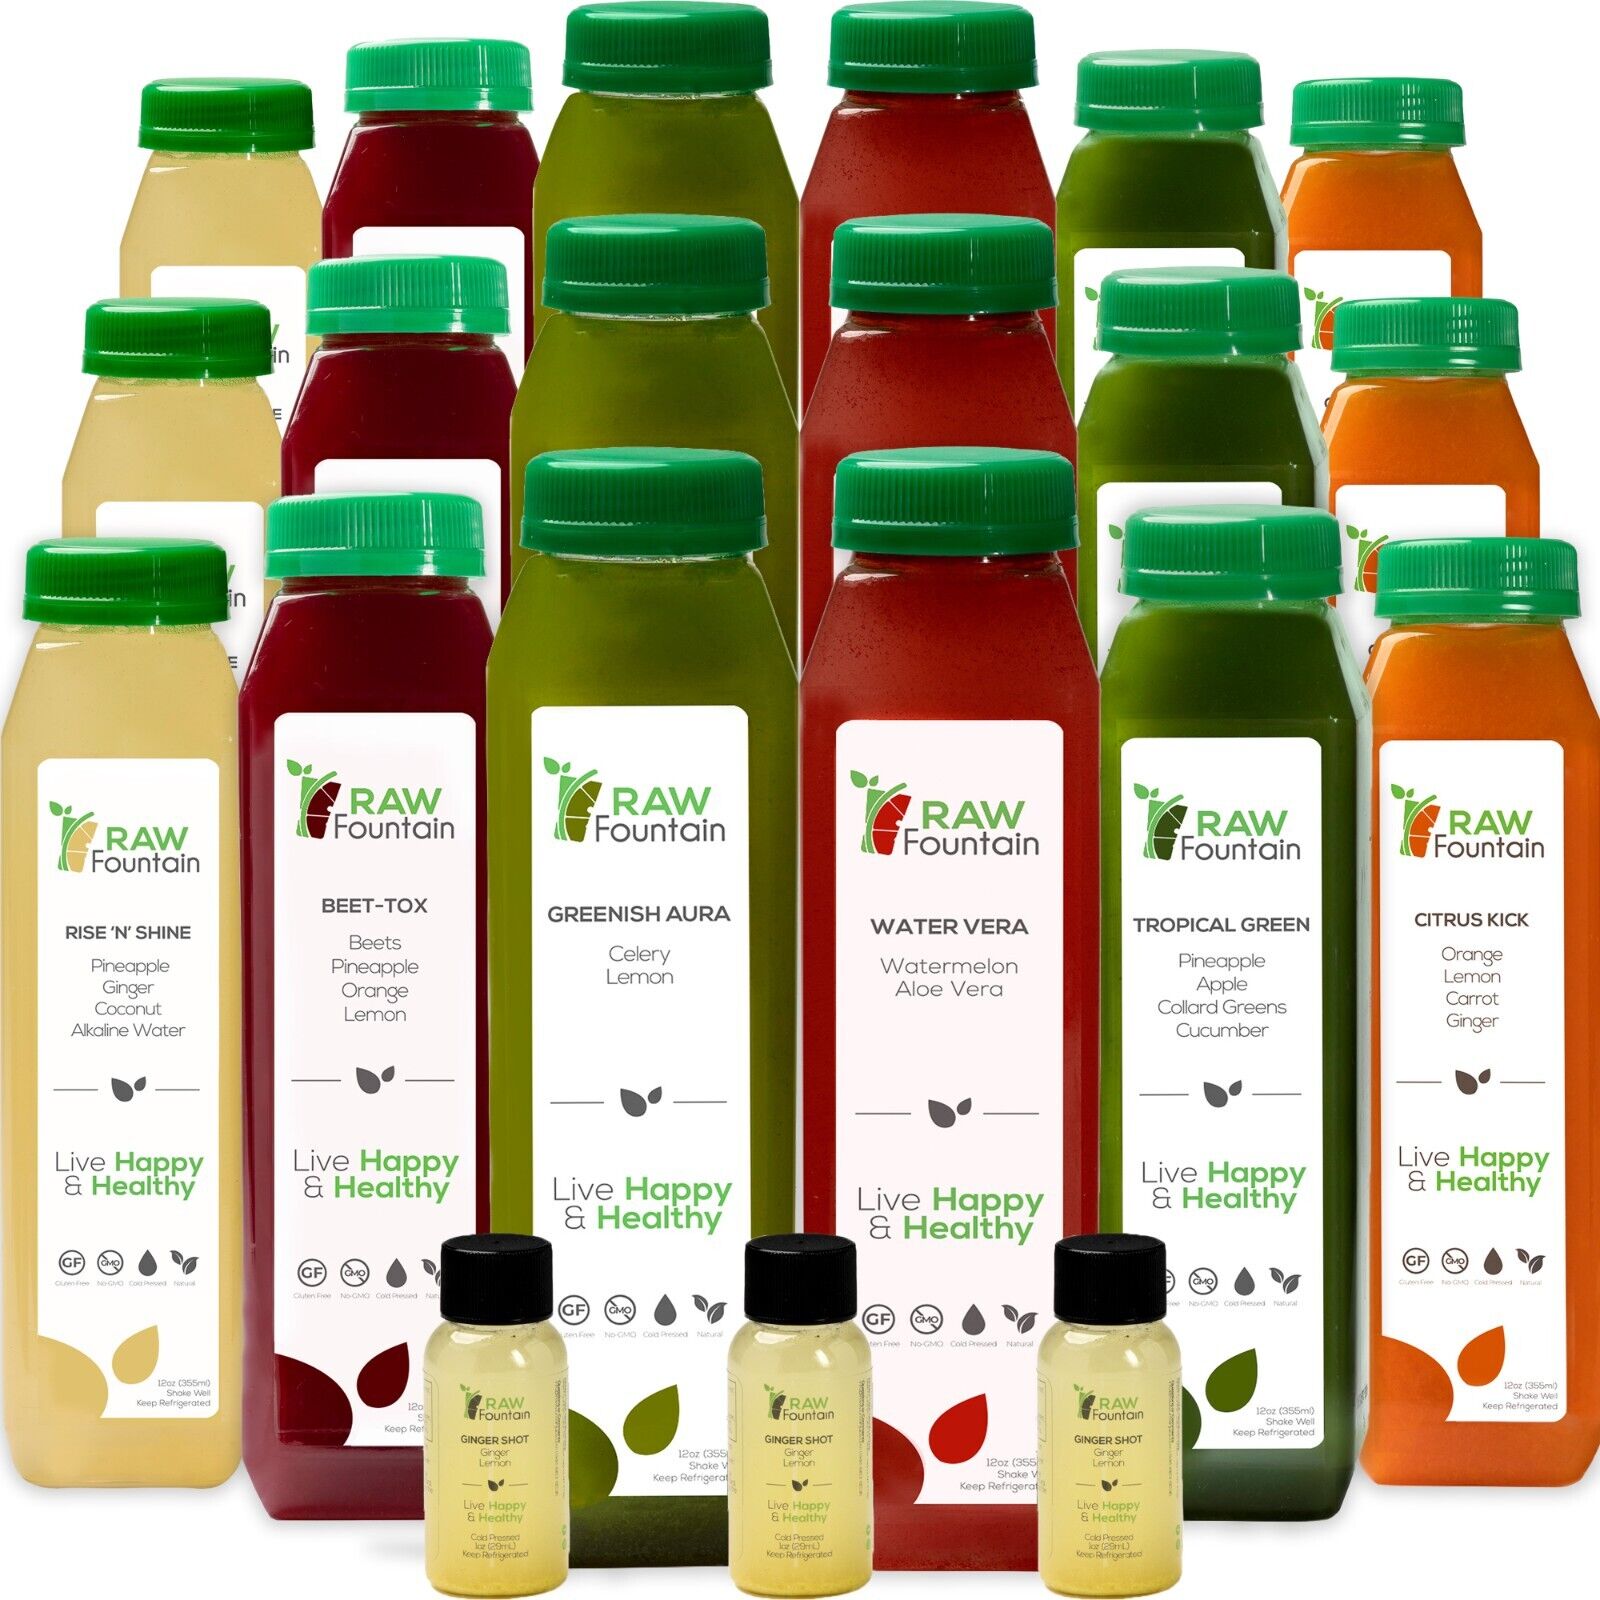 RAW Fountain Juice Cleanse Detox Cold Pressed, TROPICAL, All Natural 1,3,5,7 Day